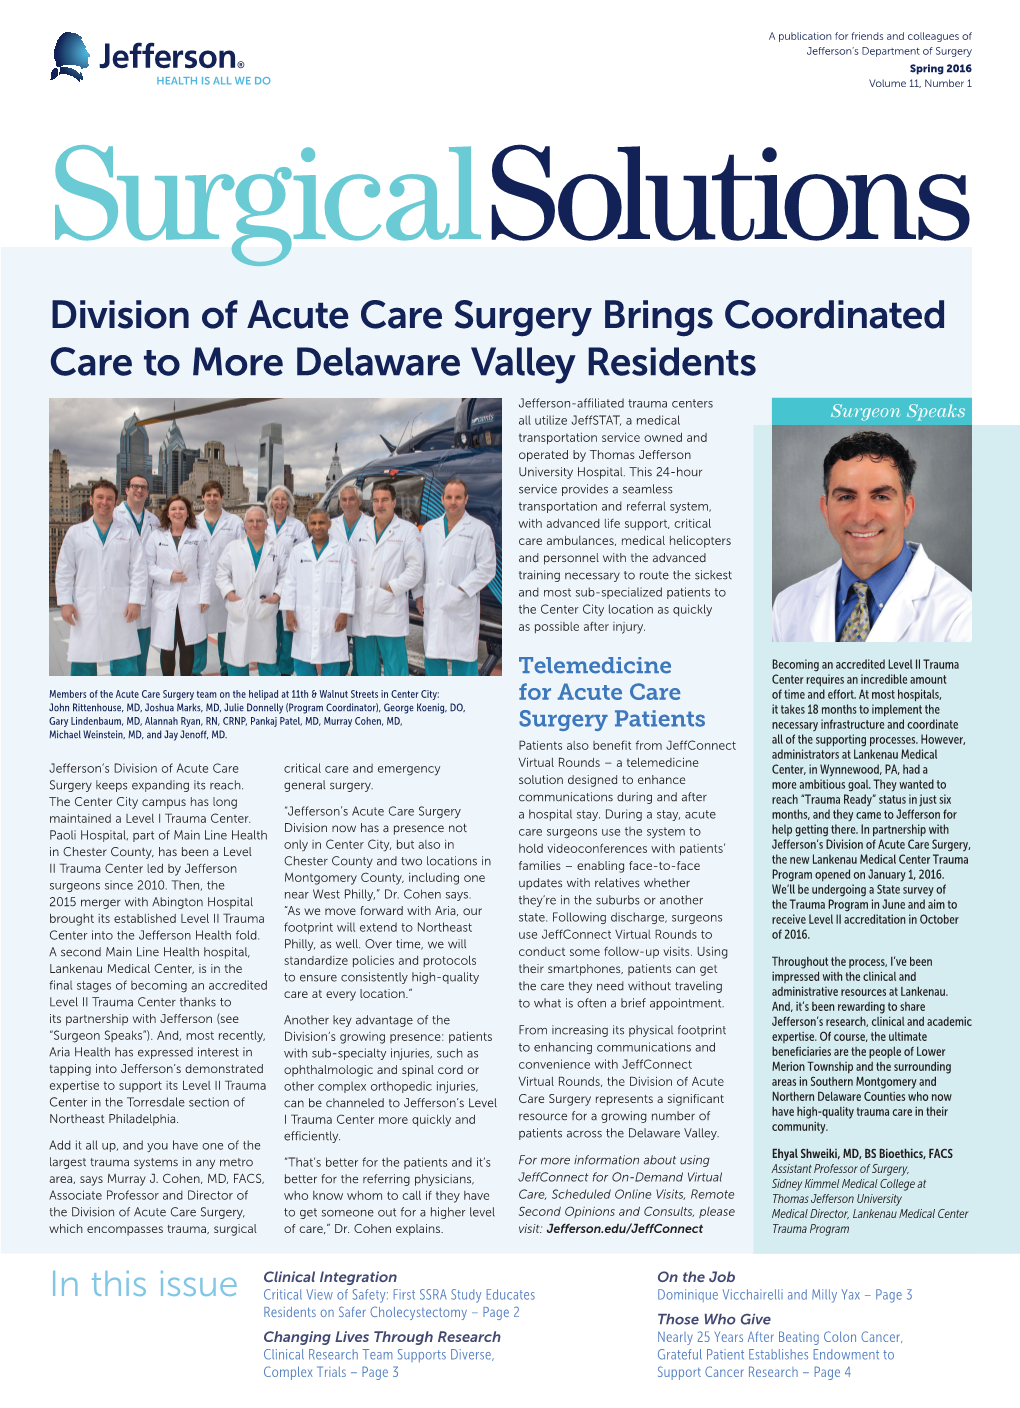 Division of Acute Care Surgery Brings Coordinated Care to More Delaware Valley Residents